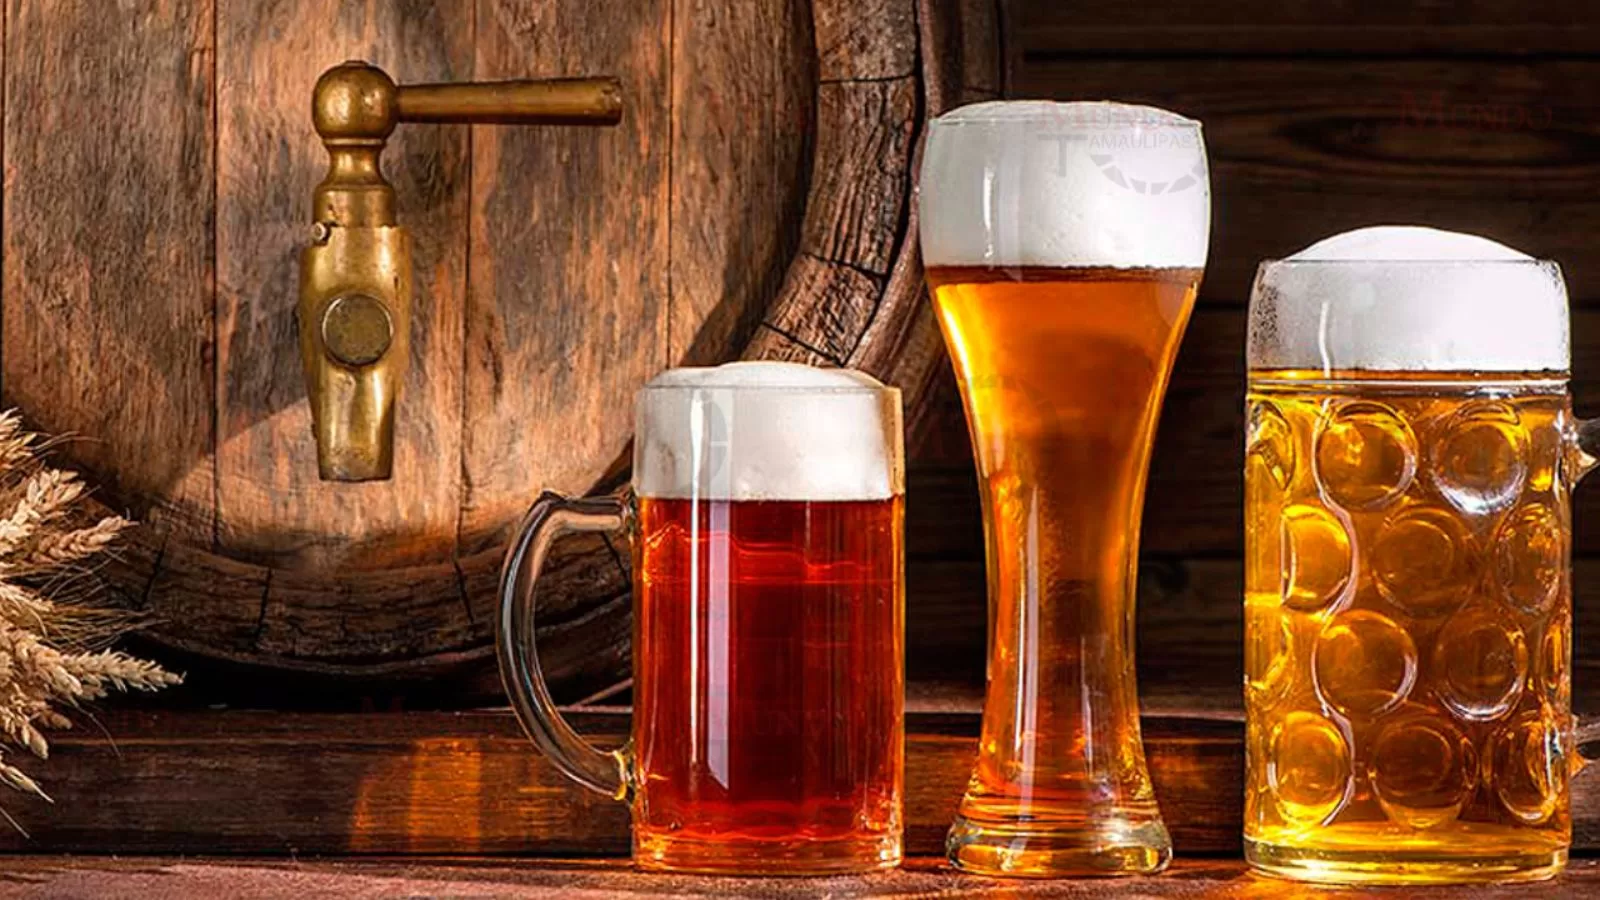 Today is International Beer Day
